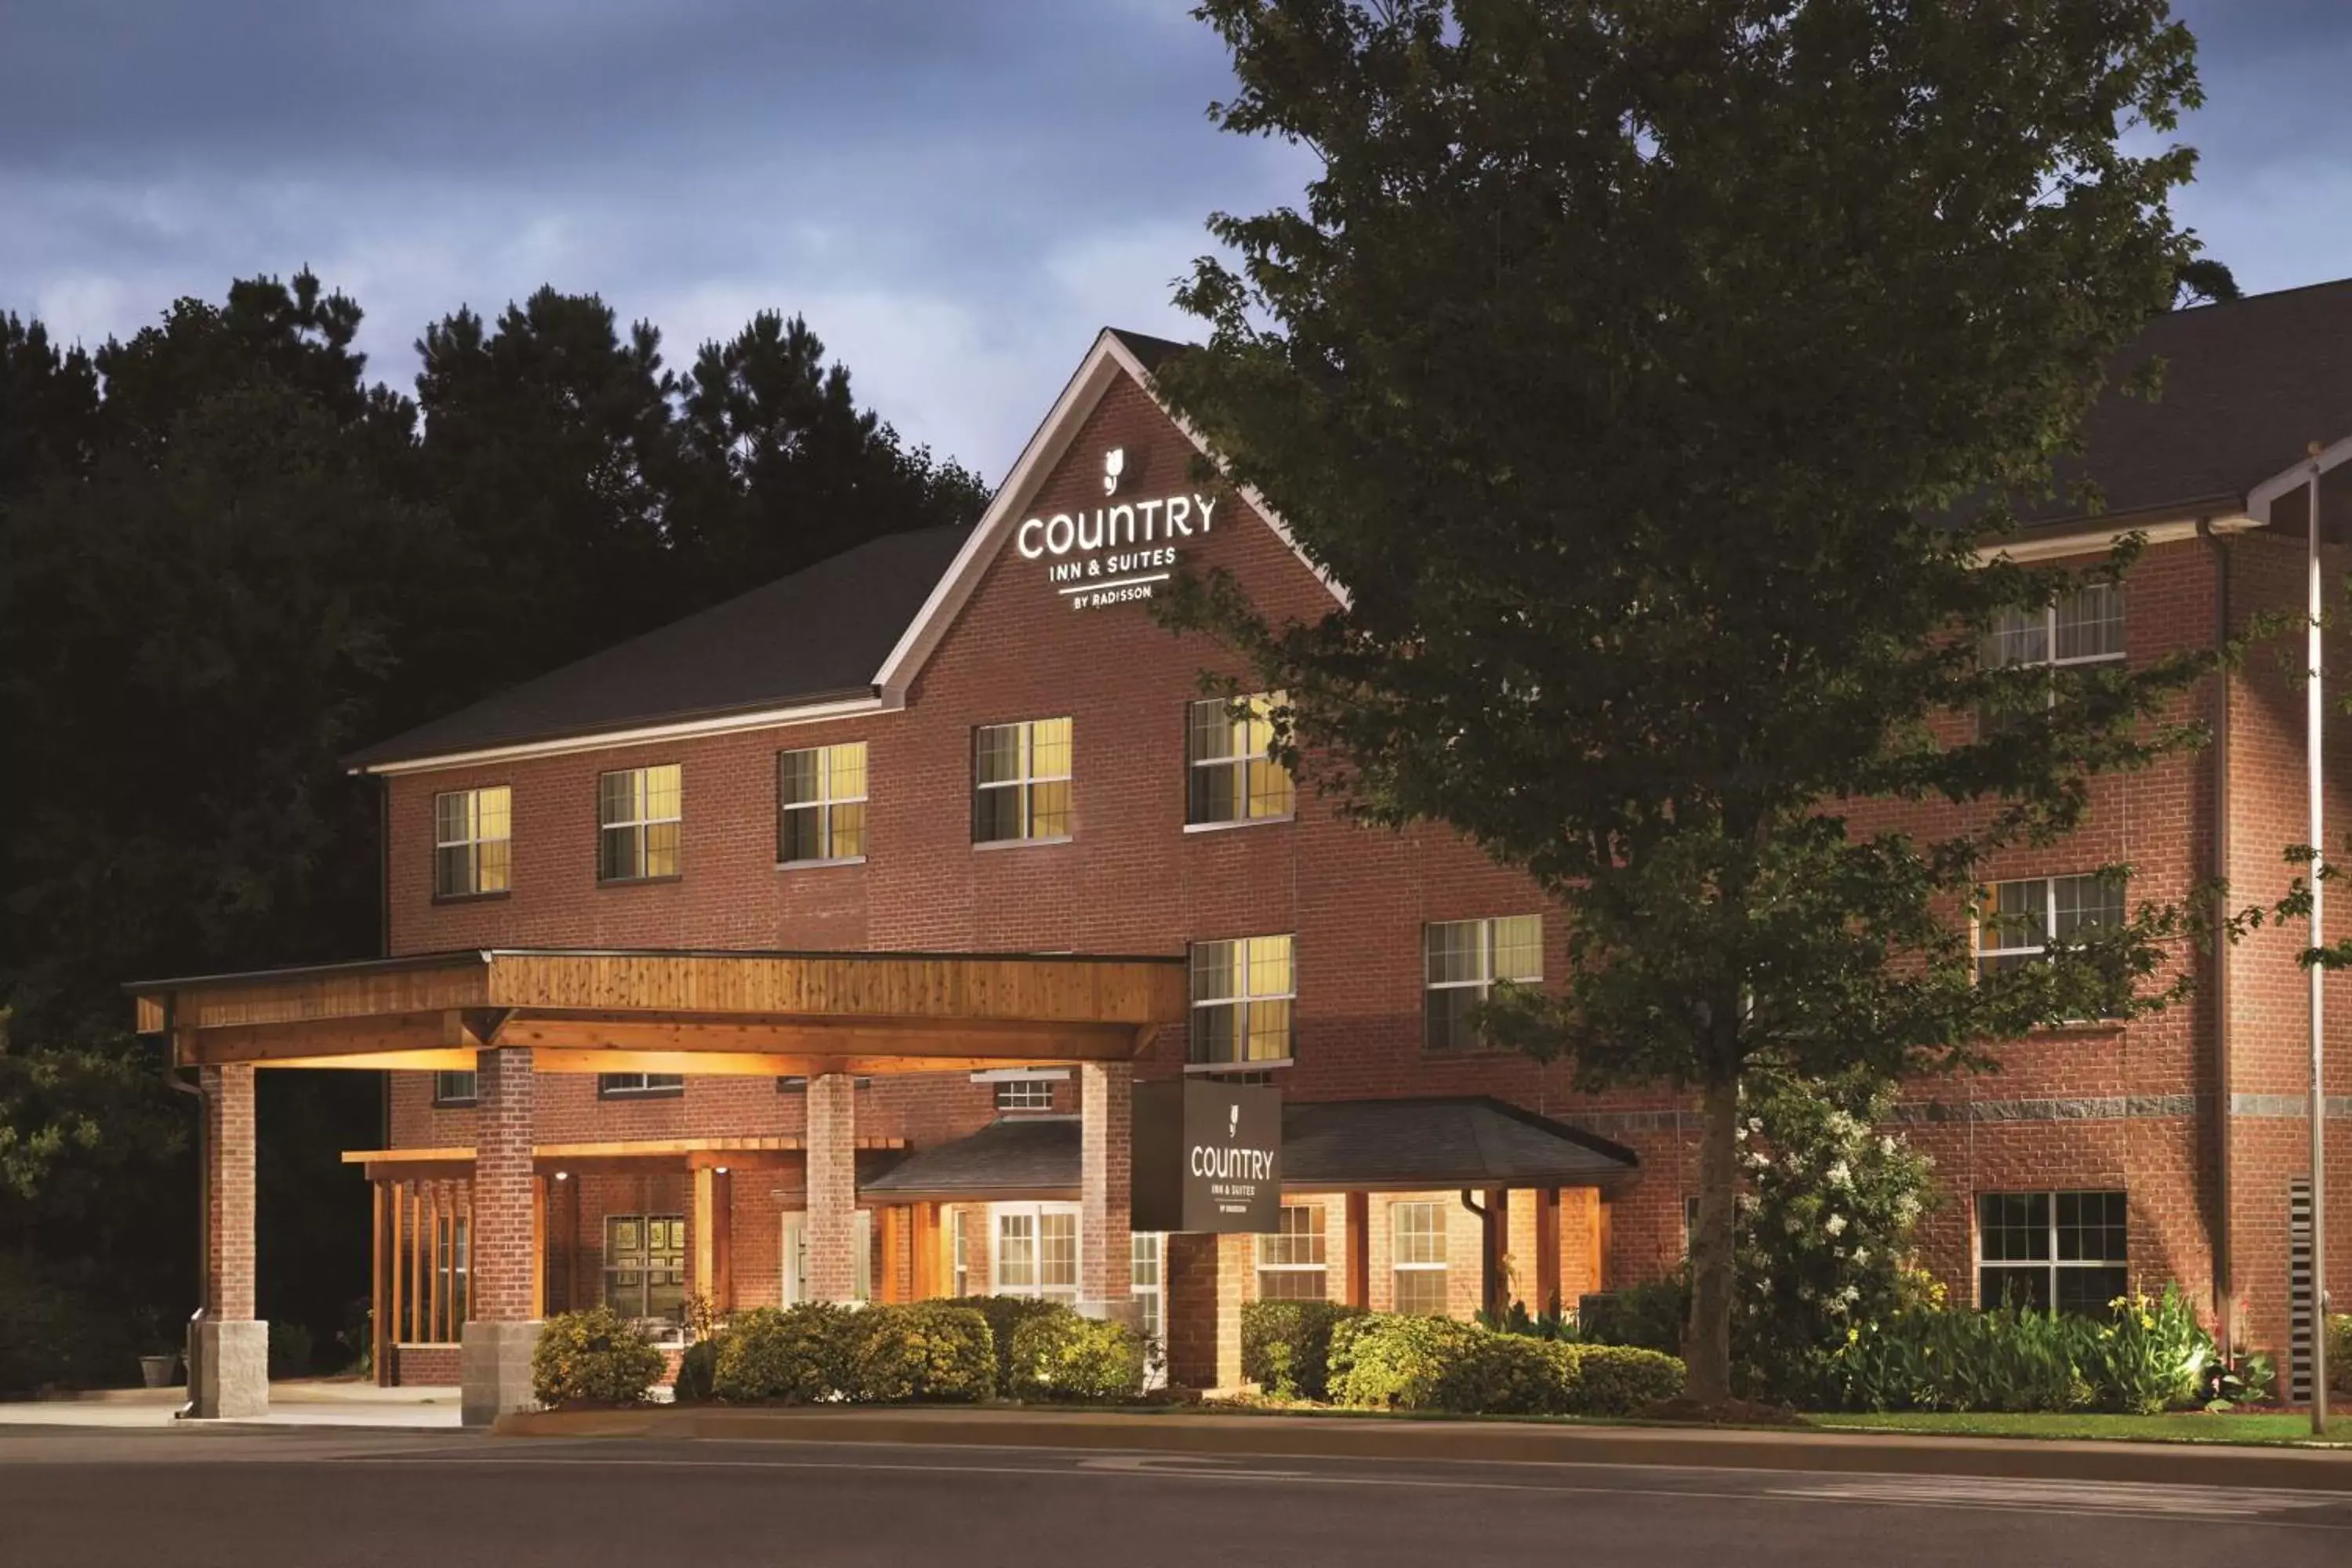 Property Building in Country Inn & Suites by Radisson, Newnan, GA